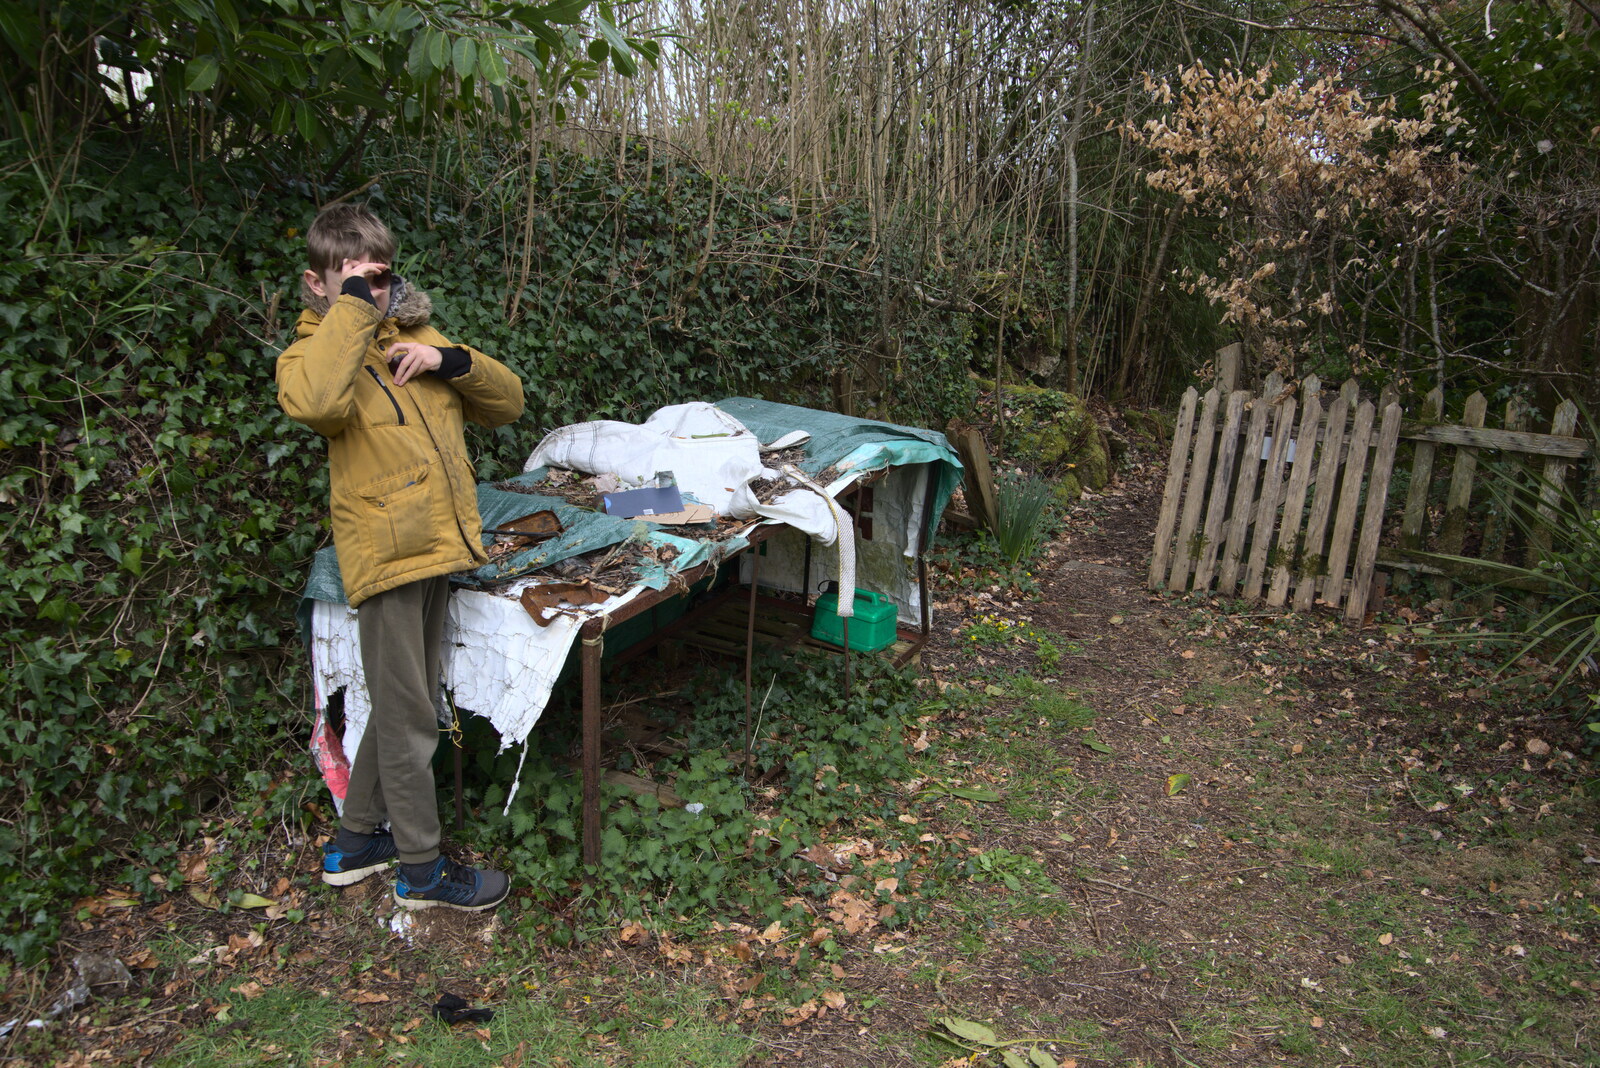 Harry pokes around with stuff in the garden from Easter in South Zeal and Moretonhampstead, Devon - 9th April